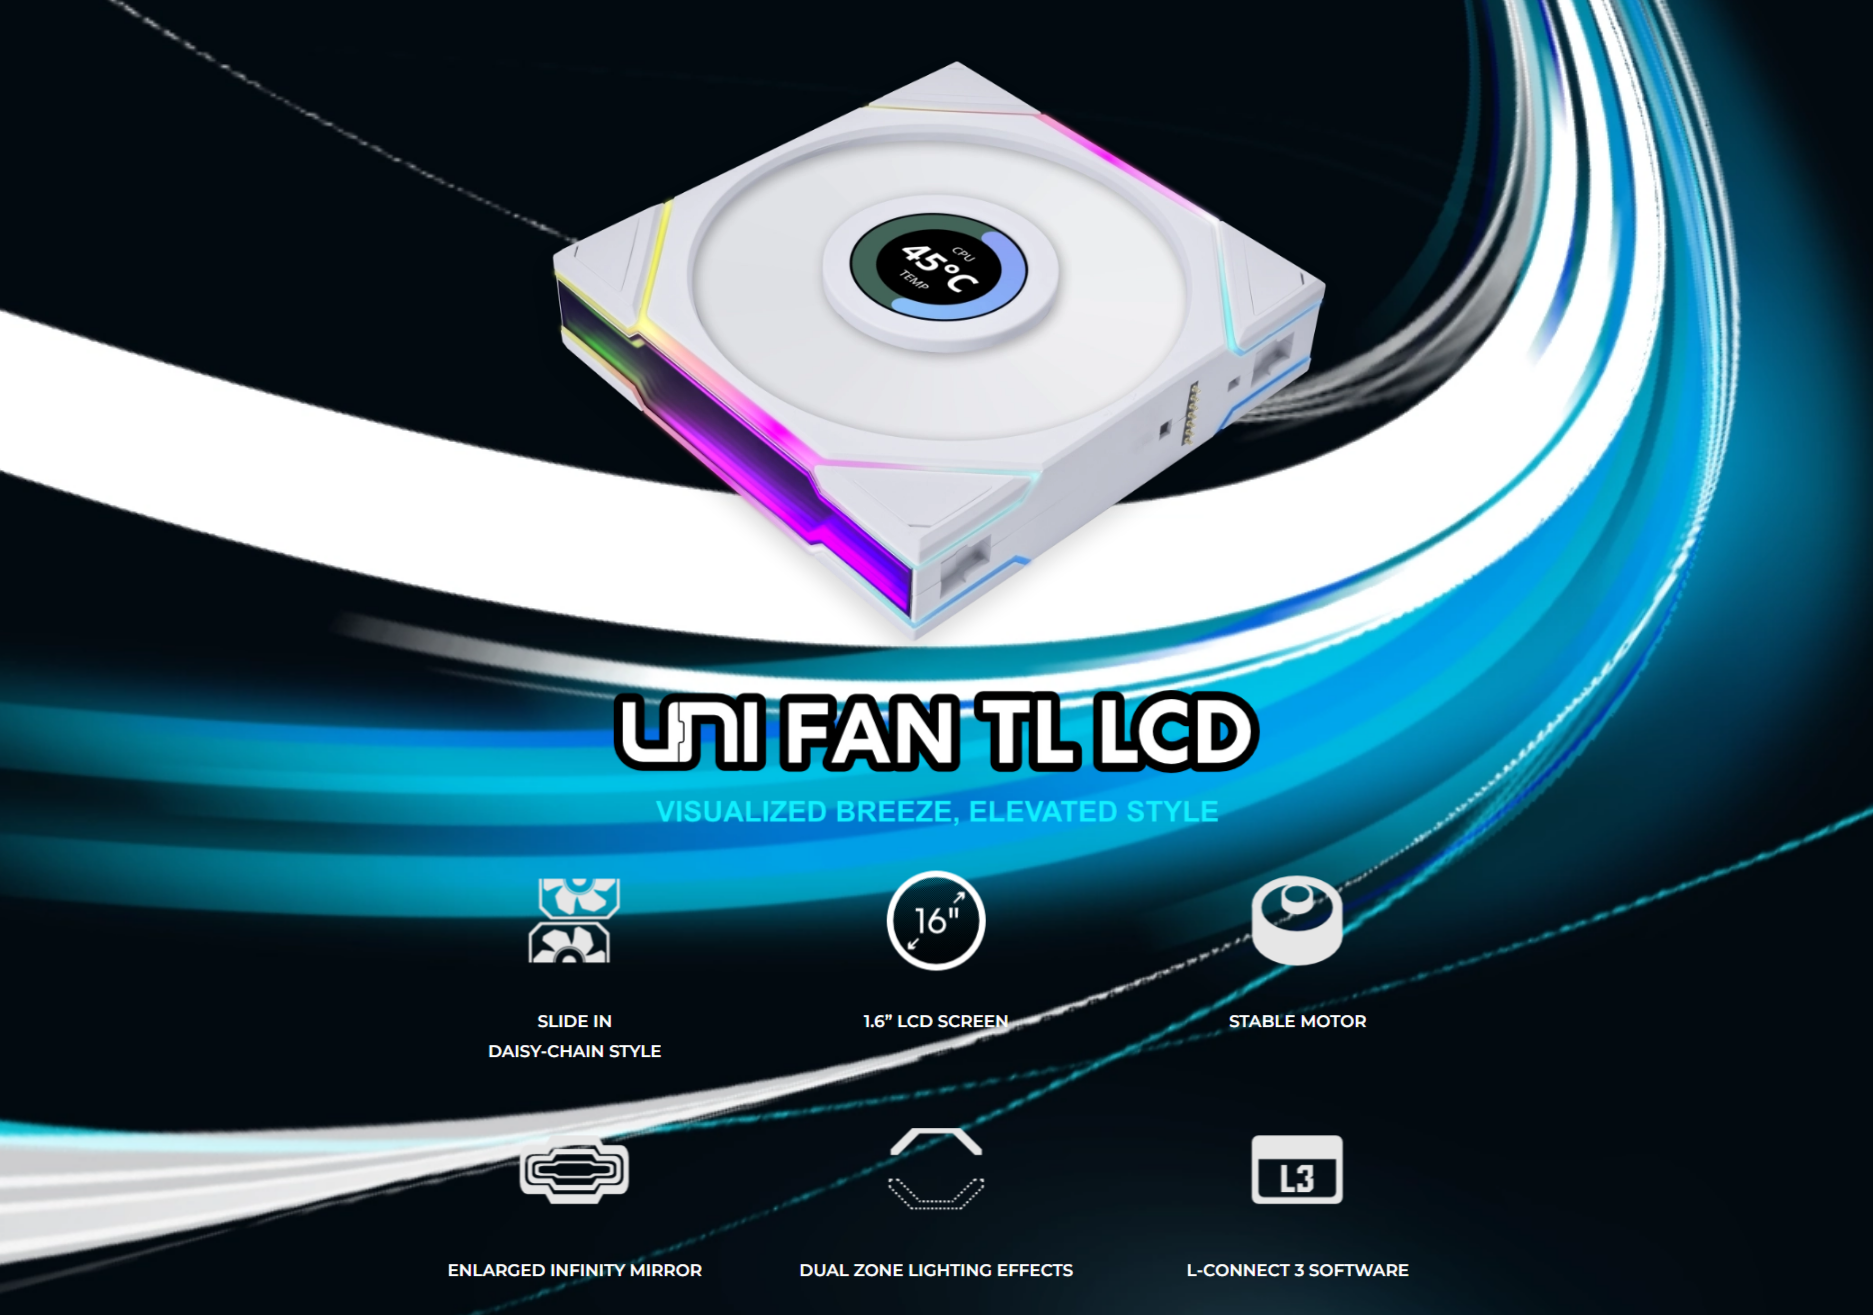 A large marketing image providing additional information about the product Lian Li UNI Fan TL LCD 140 140mm Fan Single Pack - White - Additional alt info not provided